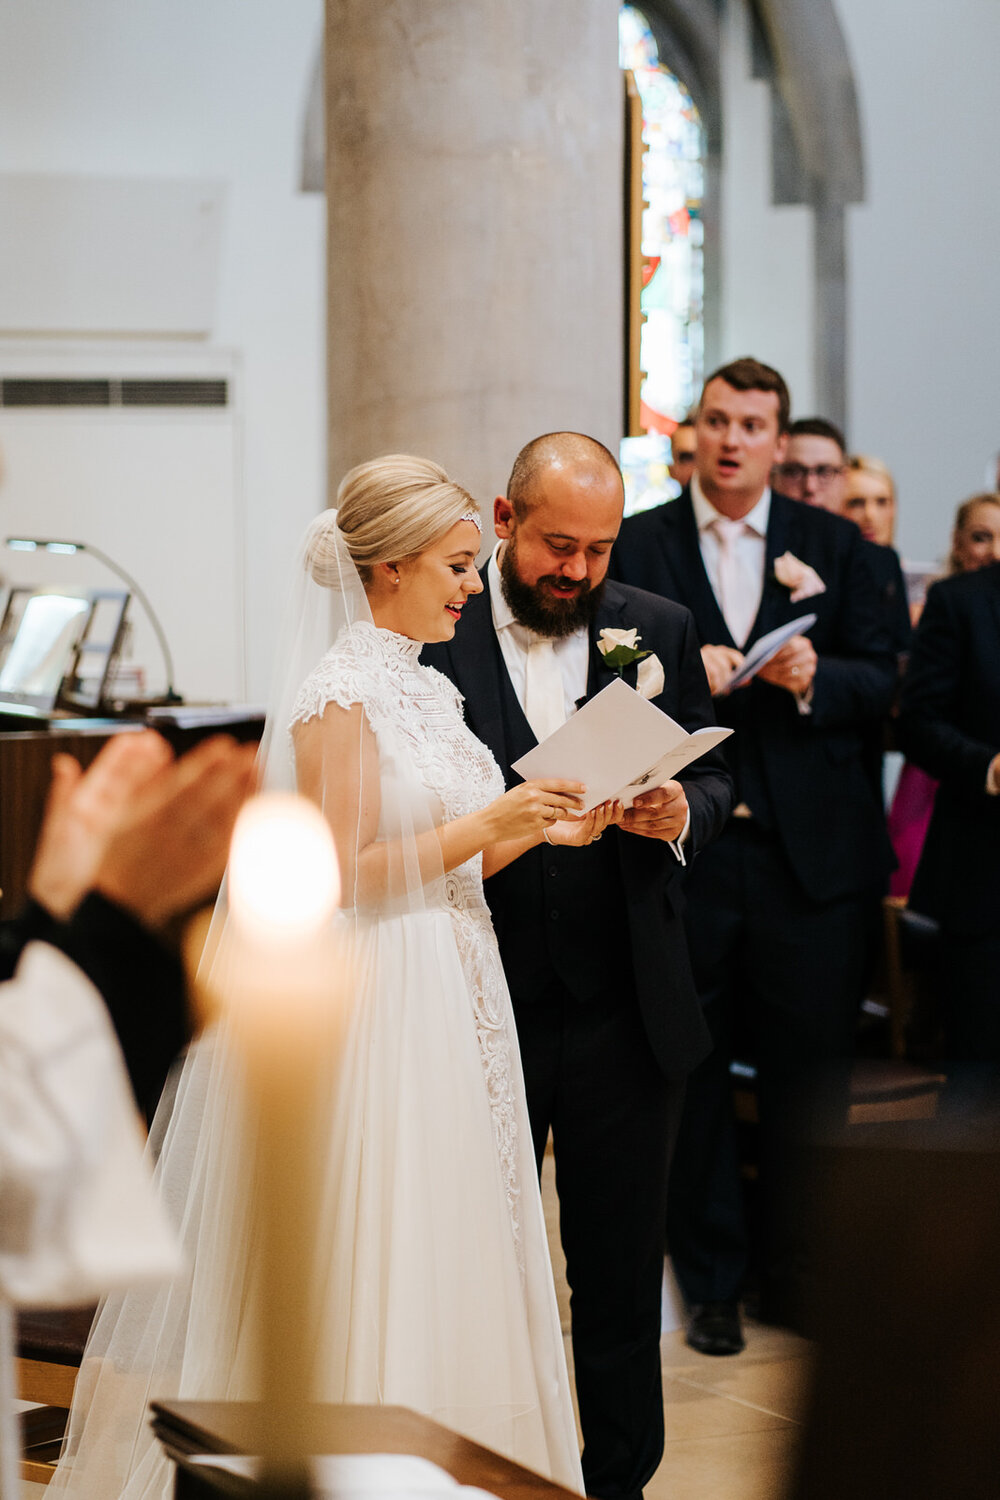 Bride and groom stand next to each other and sing one of the hymns during wedding at St Matthias wedding on Richmond Hill in London